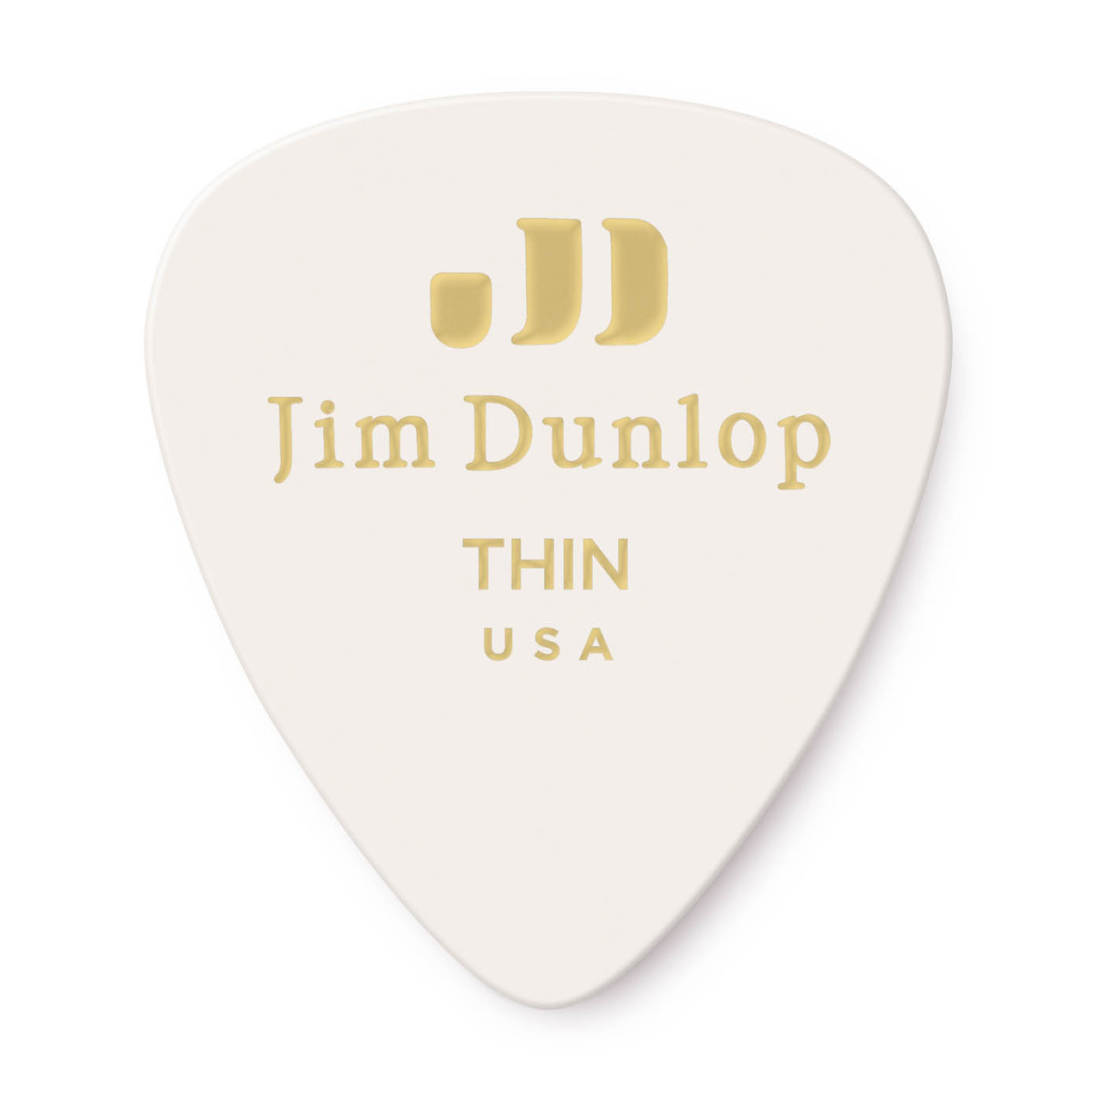 Dunlop - Celluloid Player Pack (72 Pack) - White Thin